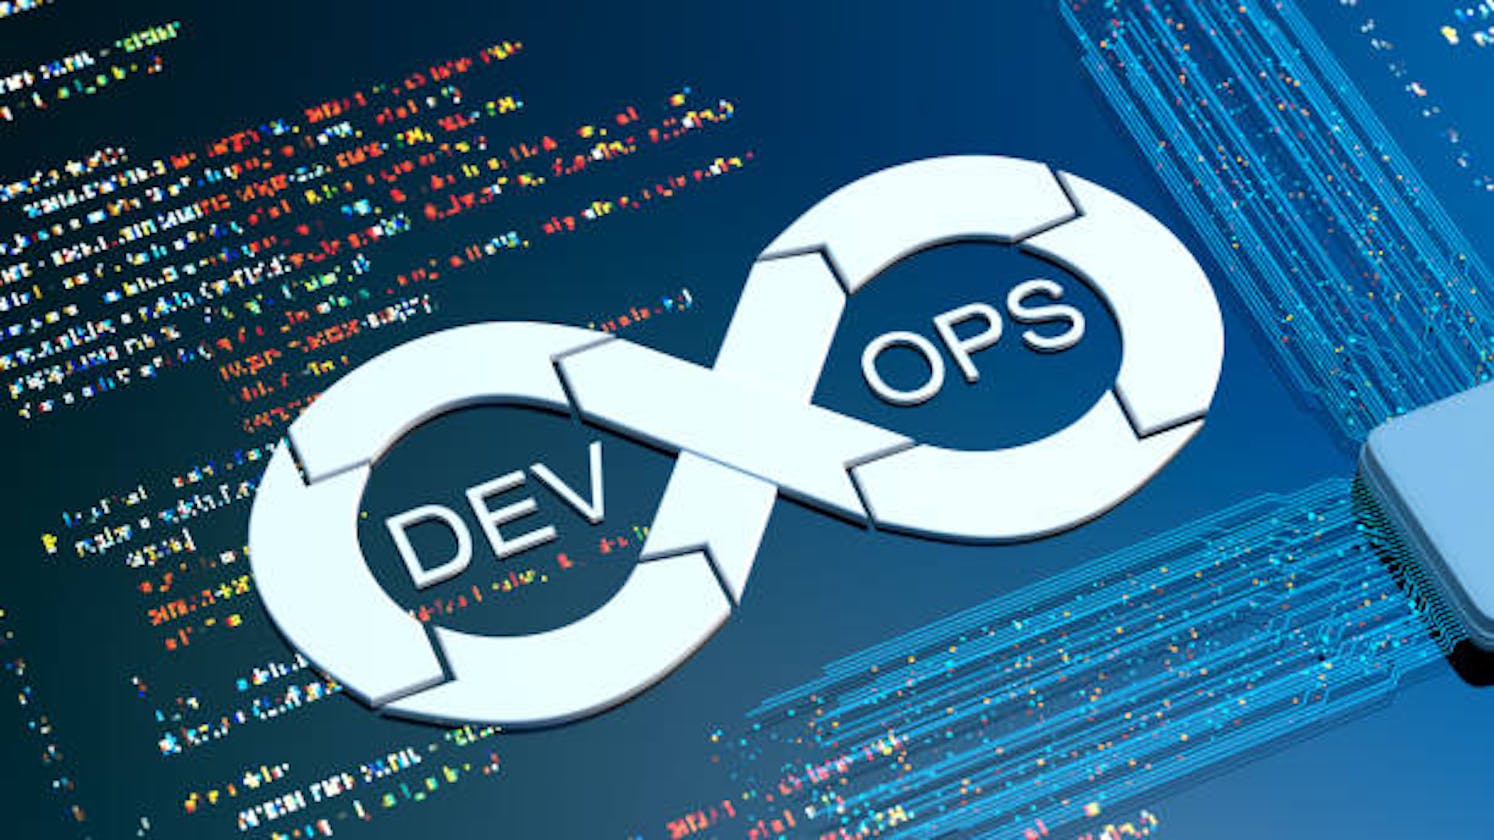 Day 1 Introduction To DevOps